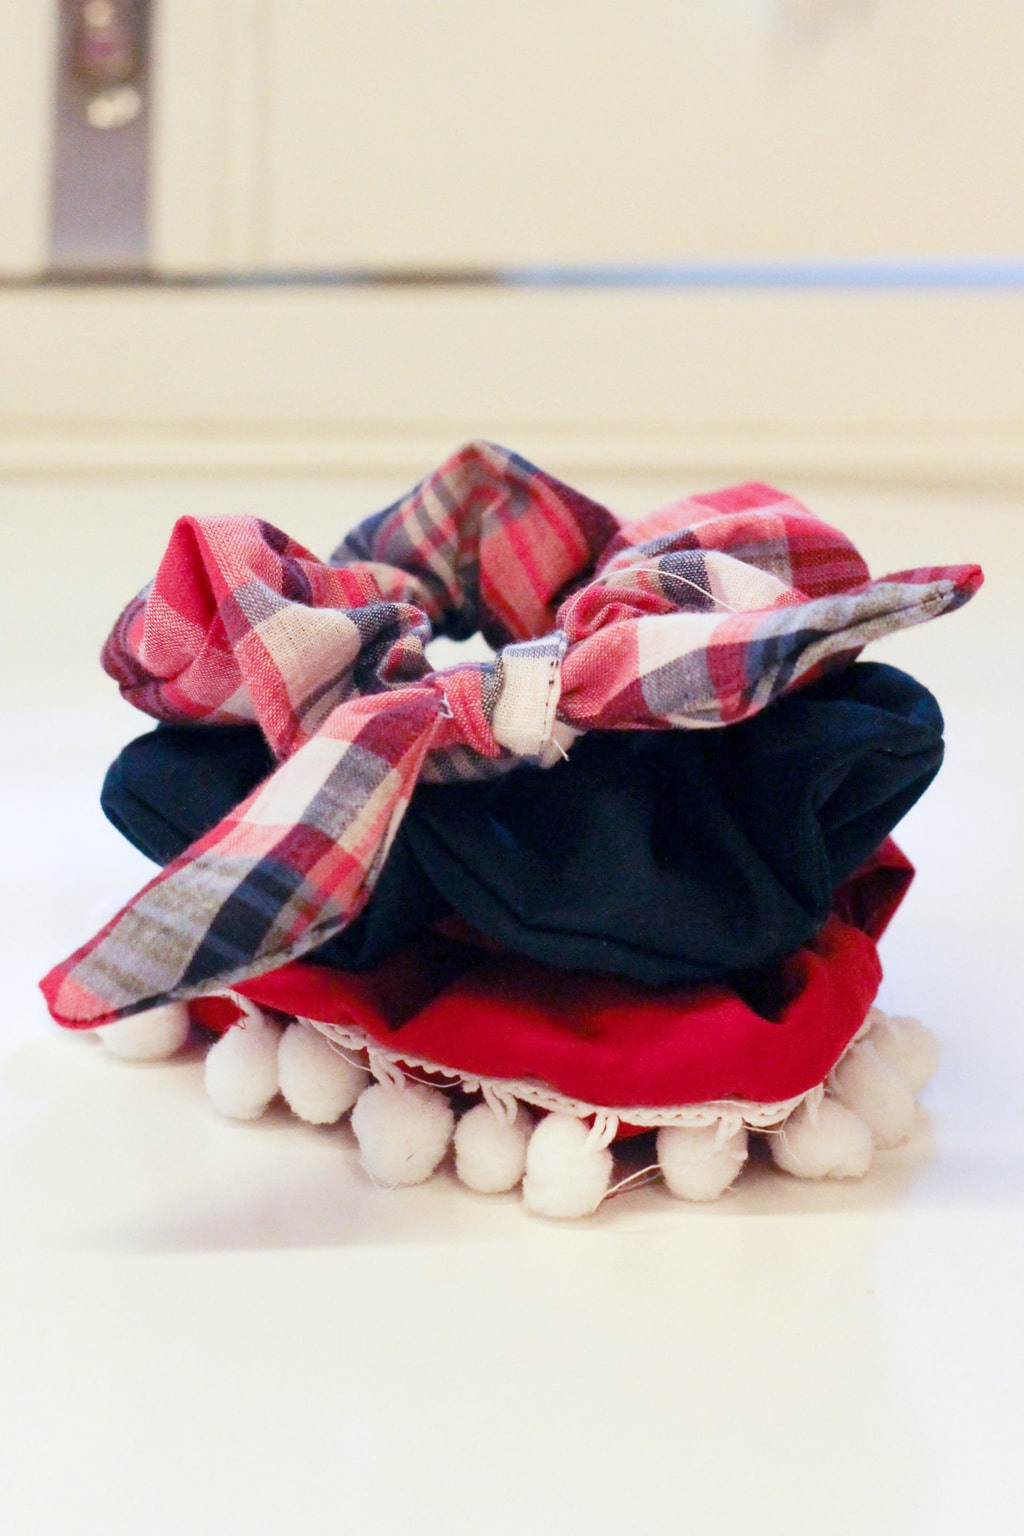 DIY scrunchies: How to make your own scrunchies with our easy sewing tutorial and pattern